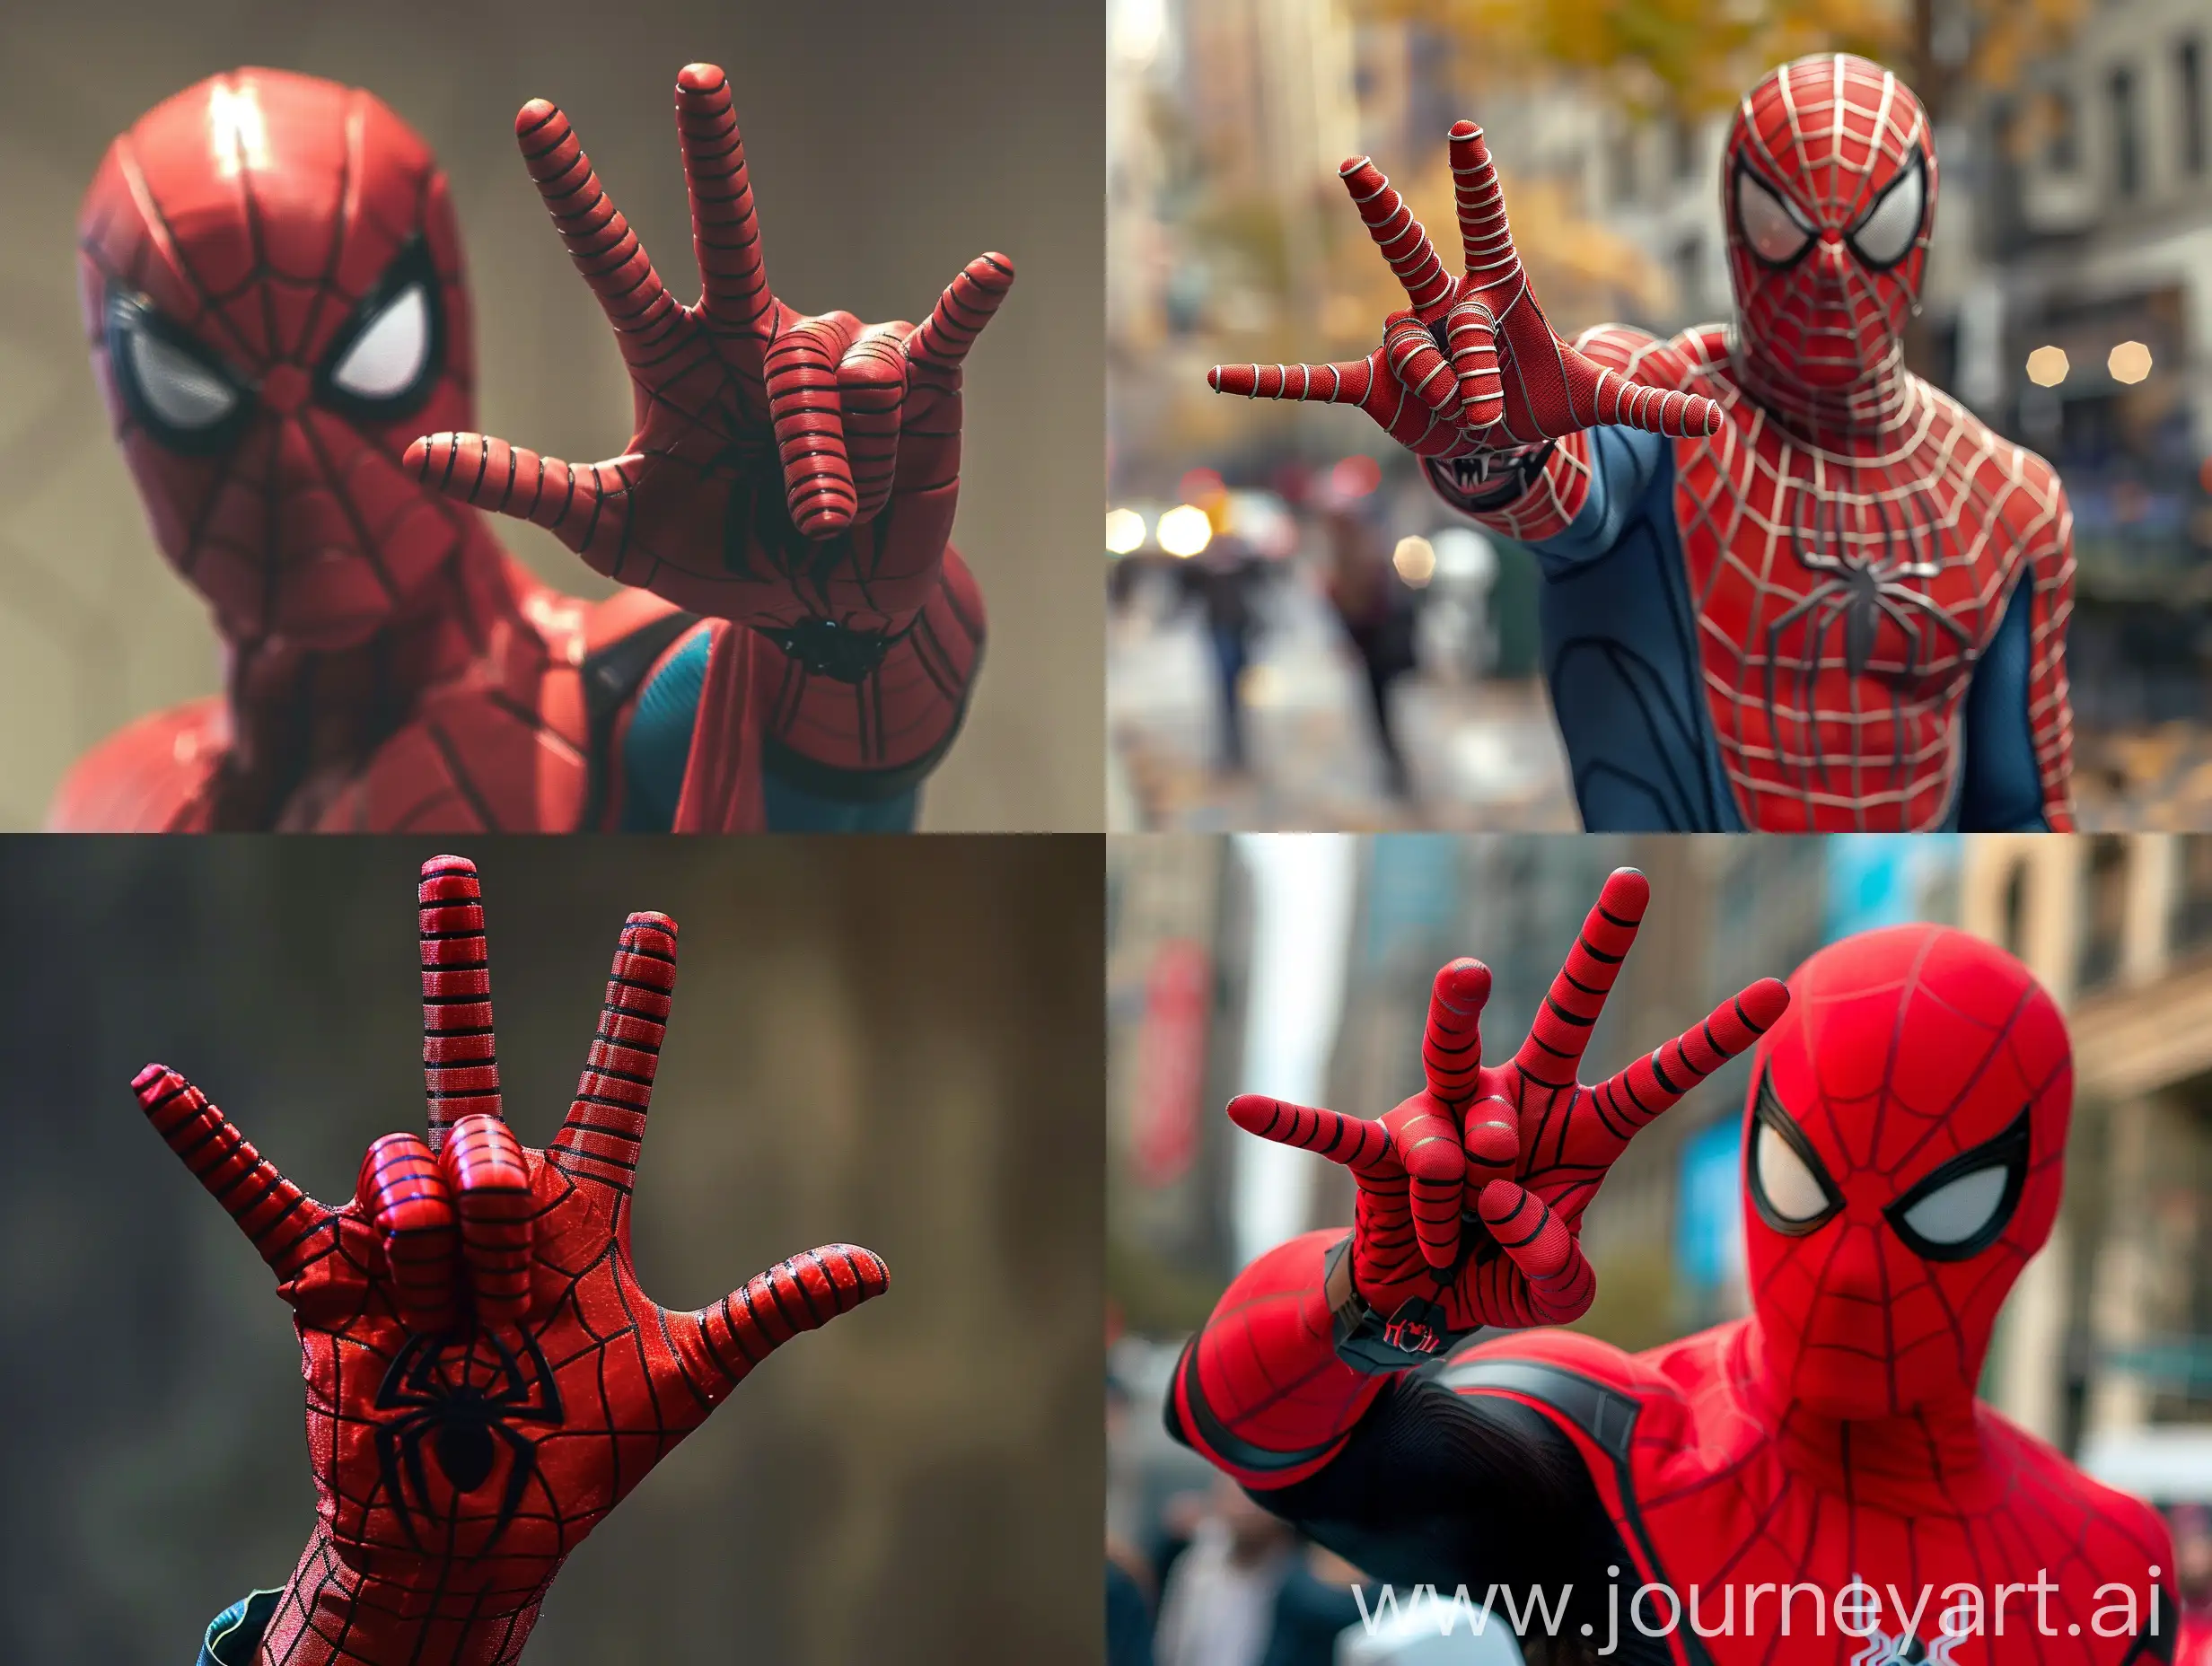 create me picture with spiderman hand showing 4 fingers